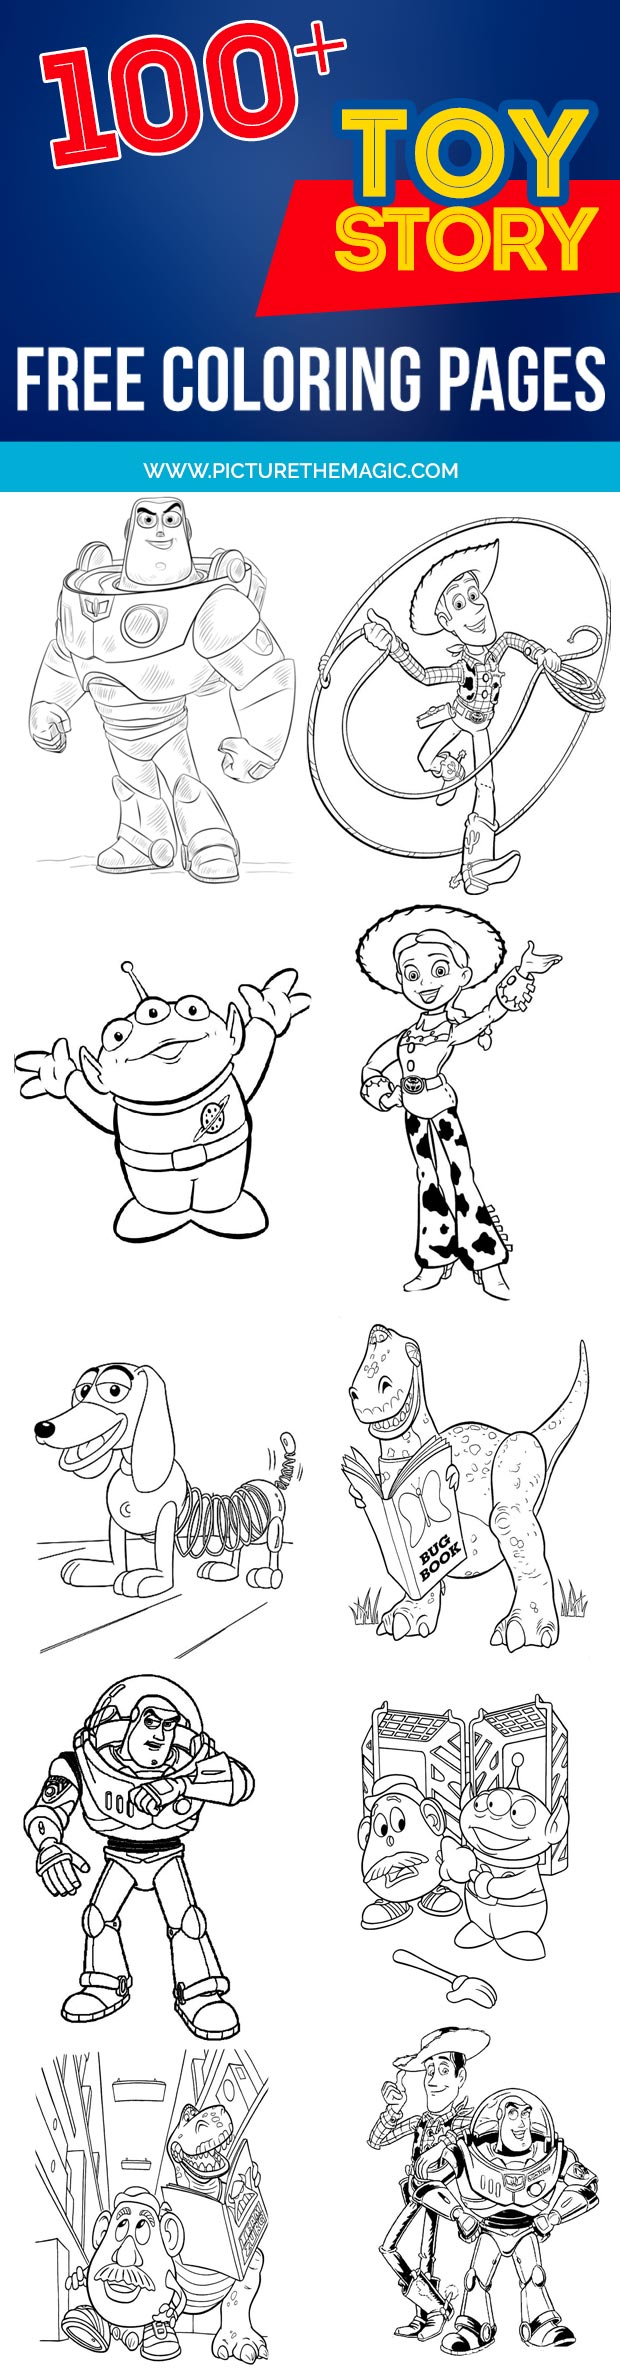 FUN! Over 100 free Toy Story Coloring Pages. Woody, Buzz Lightyear, Slinky, Rex, Jessie, Aliens, Mr. Potato Head and more friends from the movie. Free Toy Story coloring sheets.